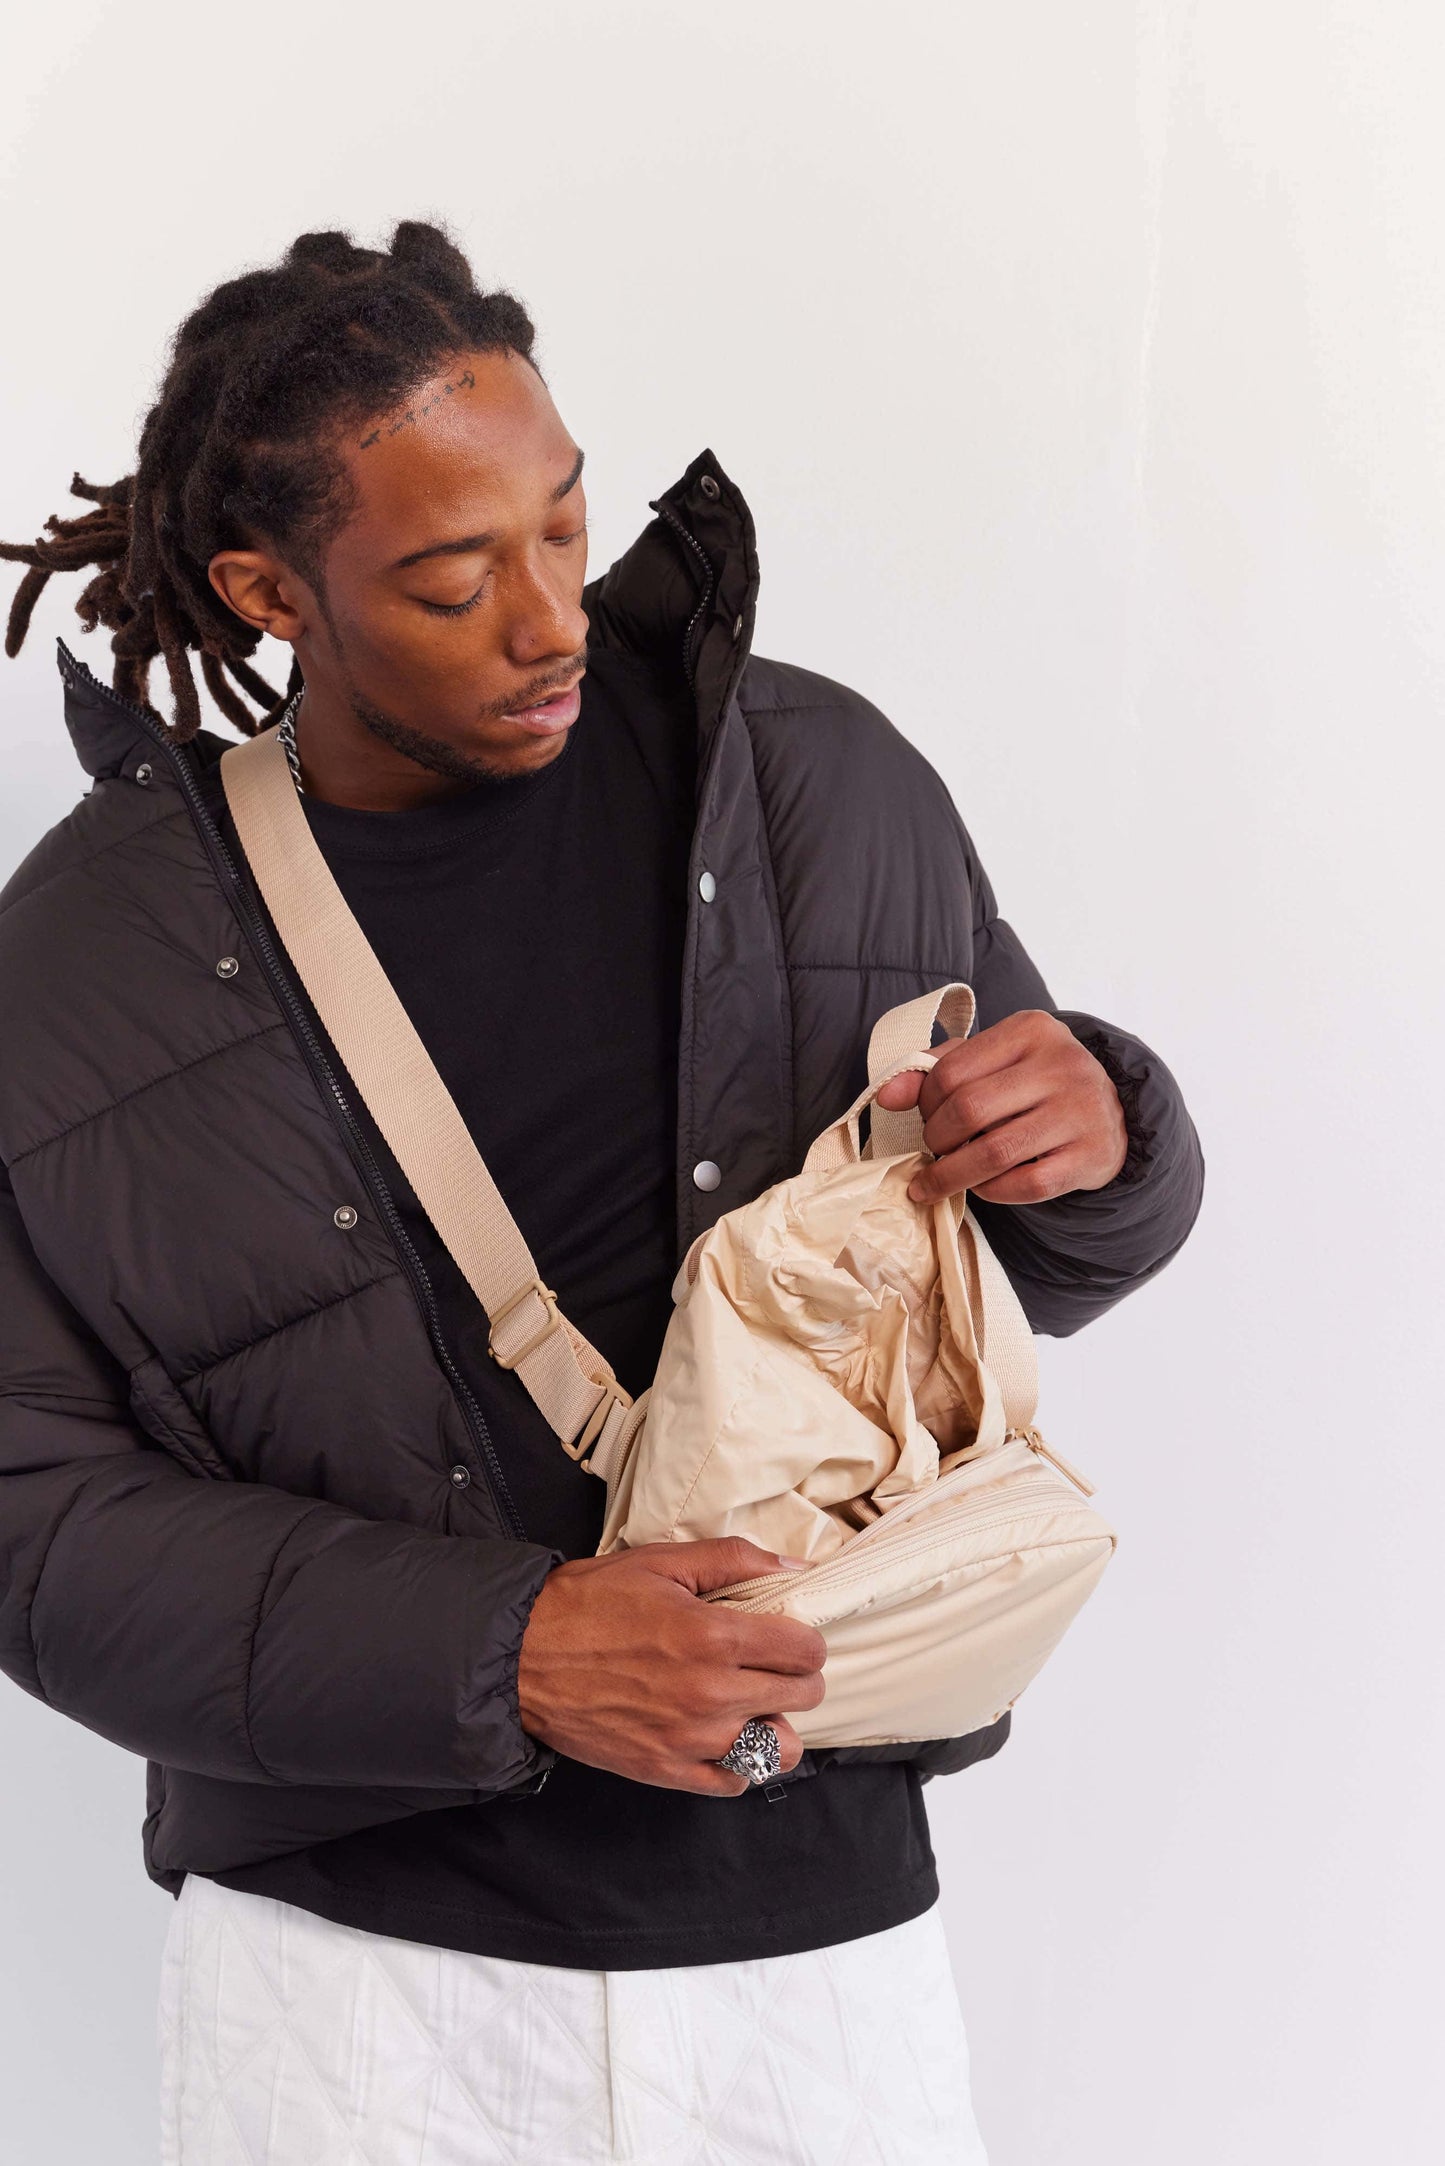 The Expandable Pouch in Beige